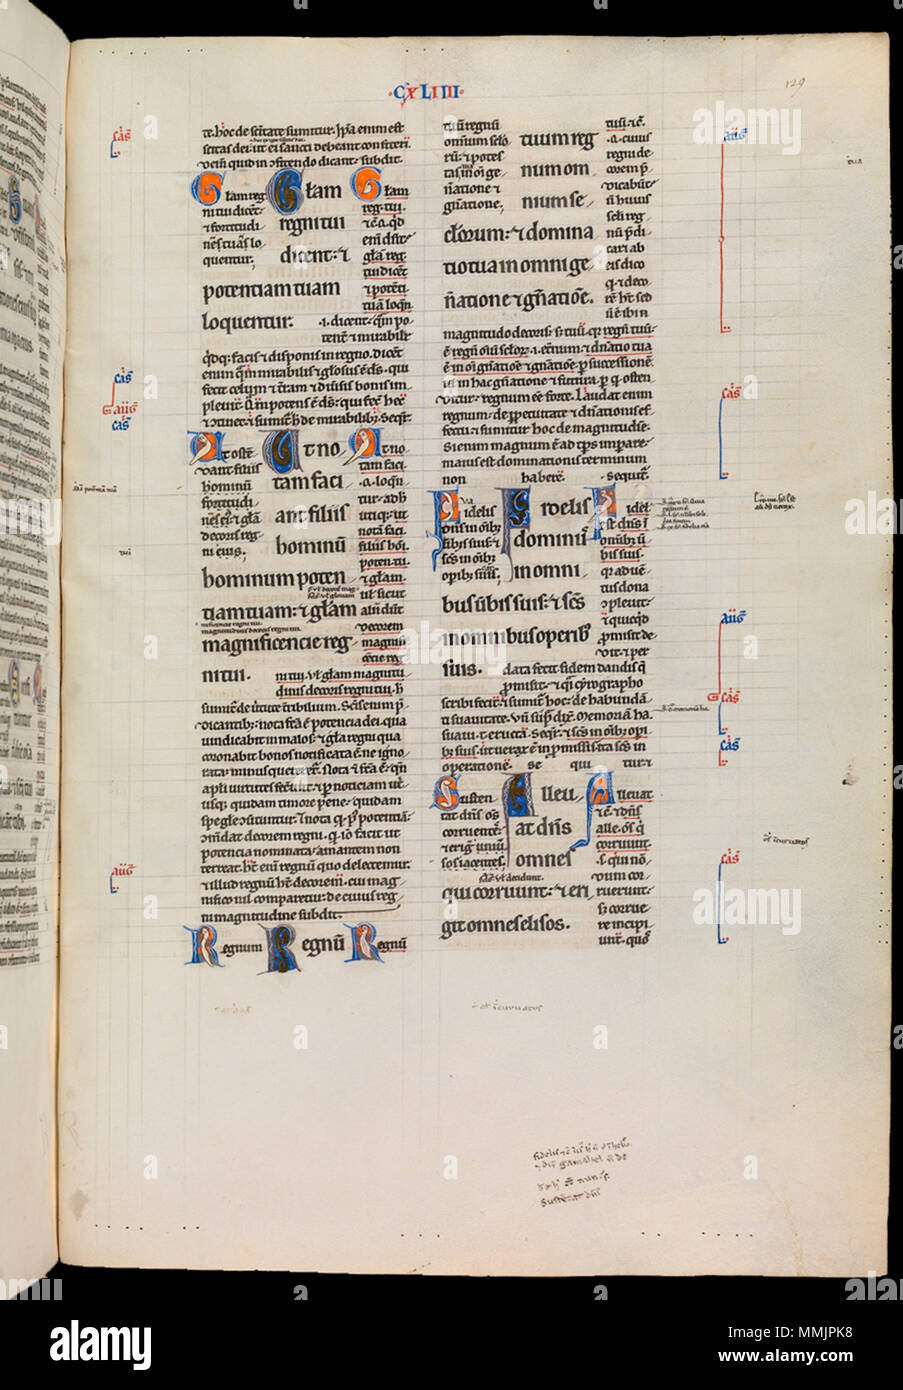 . English: Herbert of Bosham, Peter Lombard's Commentary on the Psalter, part II (PSALMS 74–150) Paris?, c. 1173–77, 20 x 11 3/4 in. (50.8 x 29.8 cm), MS. Auct. E. inf. 6, one of four volumes, fol. 129r This work was compiled by Herbert of Bosham (died c. 1194), a Hebraist in the household of Thomas Becket, archbishop of Canterbury. Twelfth-century Christian theologians often turned to Jewish commentaries on the Bible to broaden their understanding of scripture. Bosham consulted a Jewish scholar, whom he called 'my grammarian.' At bottom is a note: 'The Hebrew does not have this verse [in Psal Stock Photo